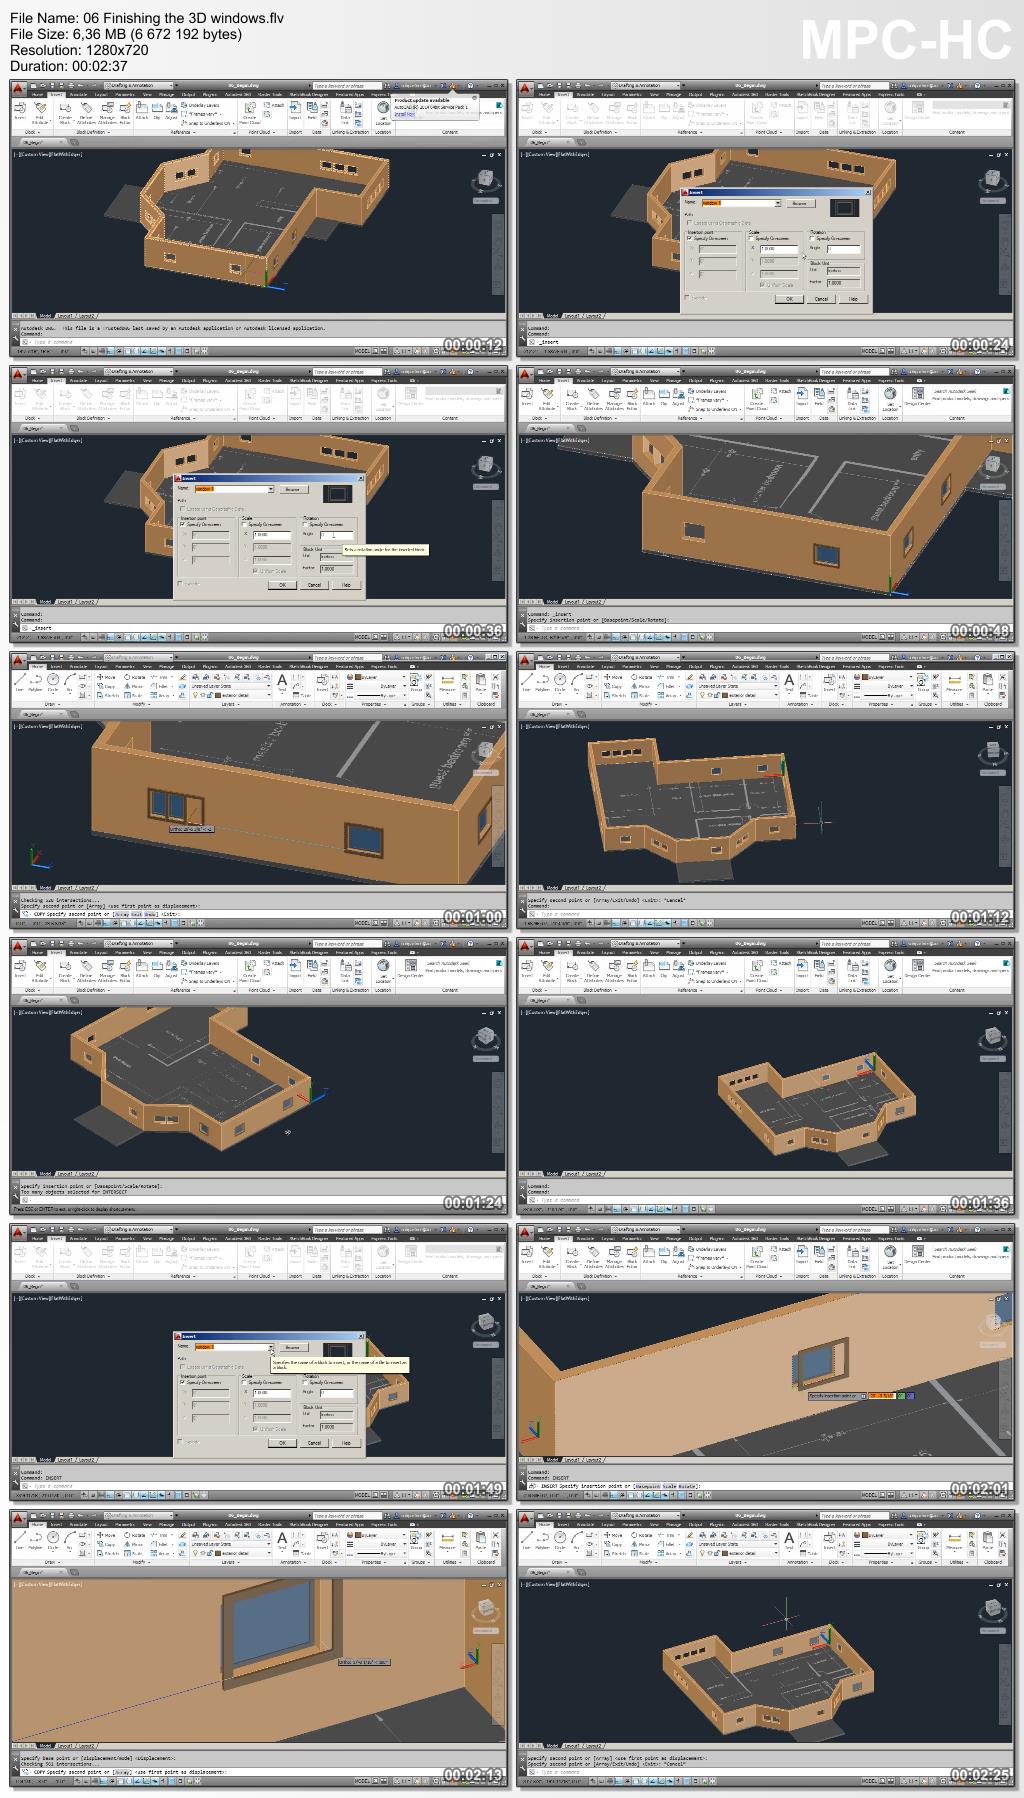 Dixxl Tuxxs - Introduction to 3D Modeling in AutoCAD